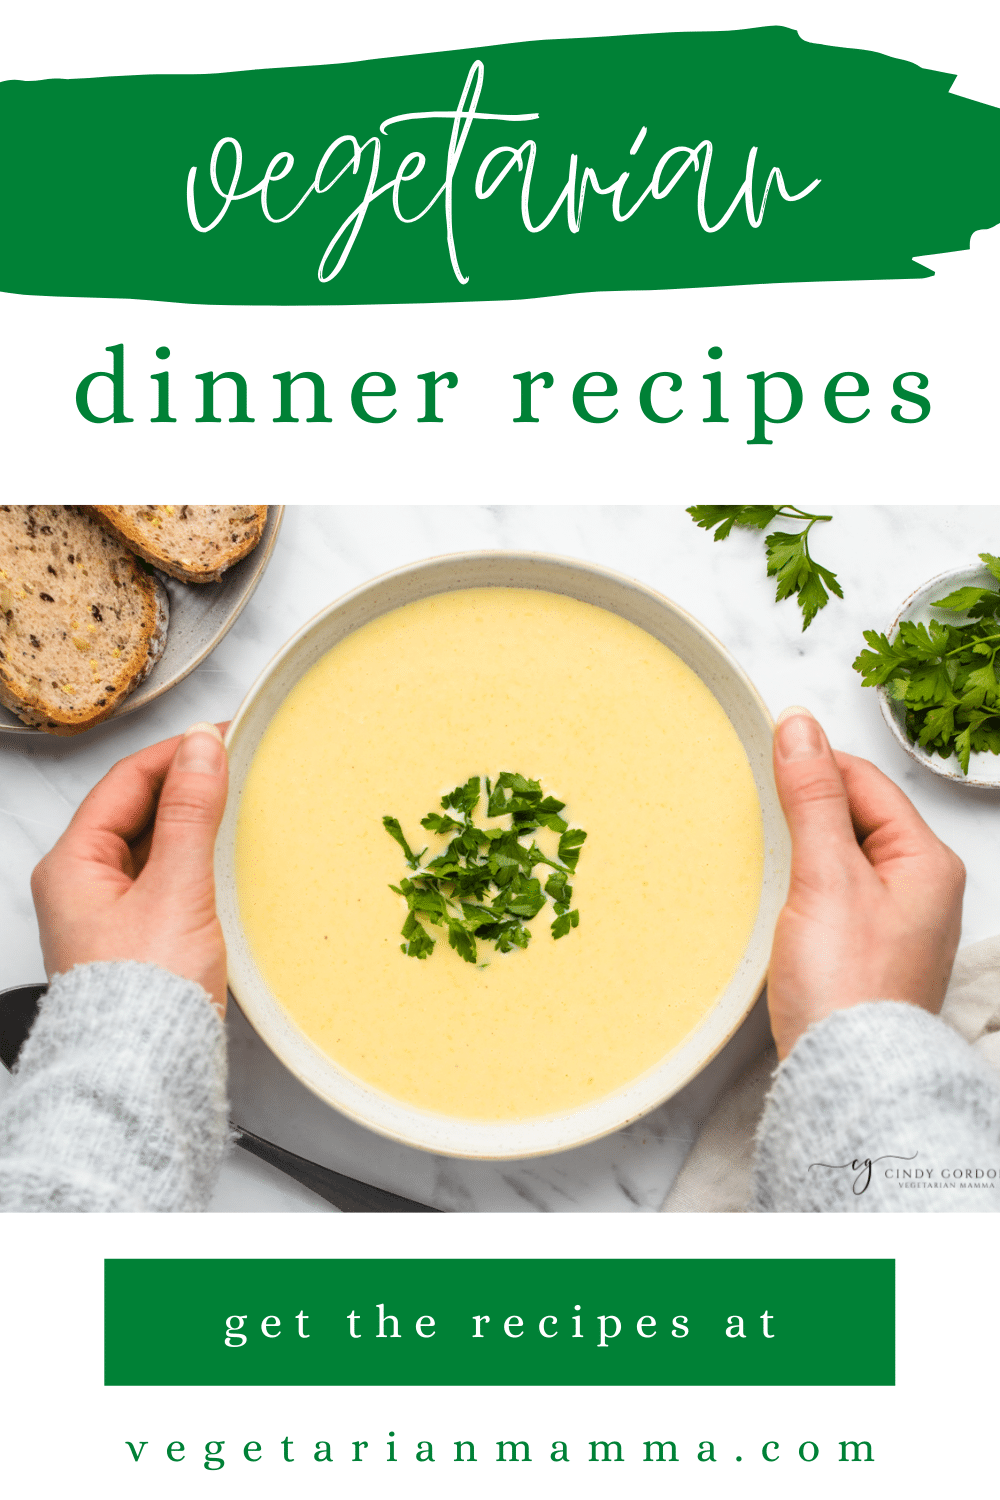 text overlay: 17+ vegetarian dinner recipes hands on each side of a white bowl filled with yellow liquid and green herbs on top